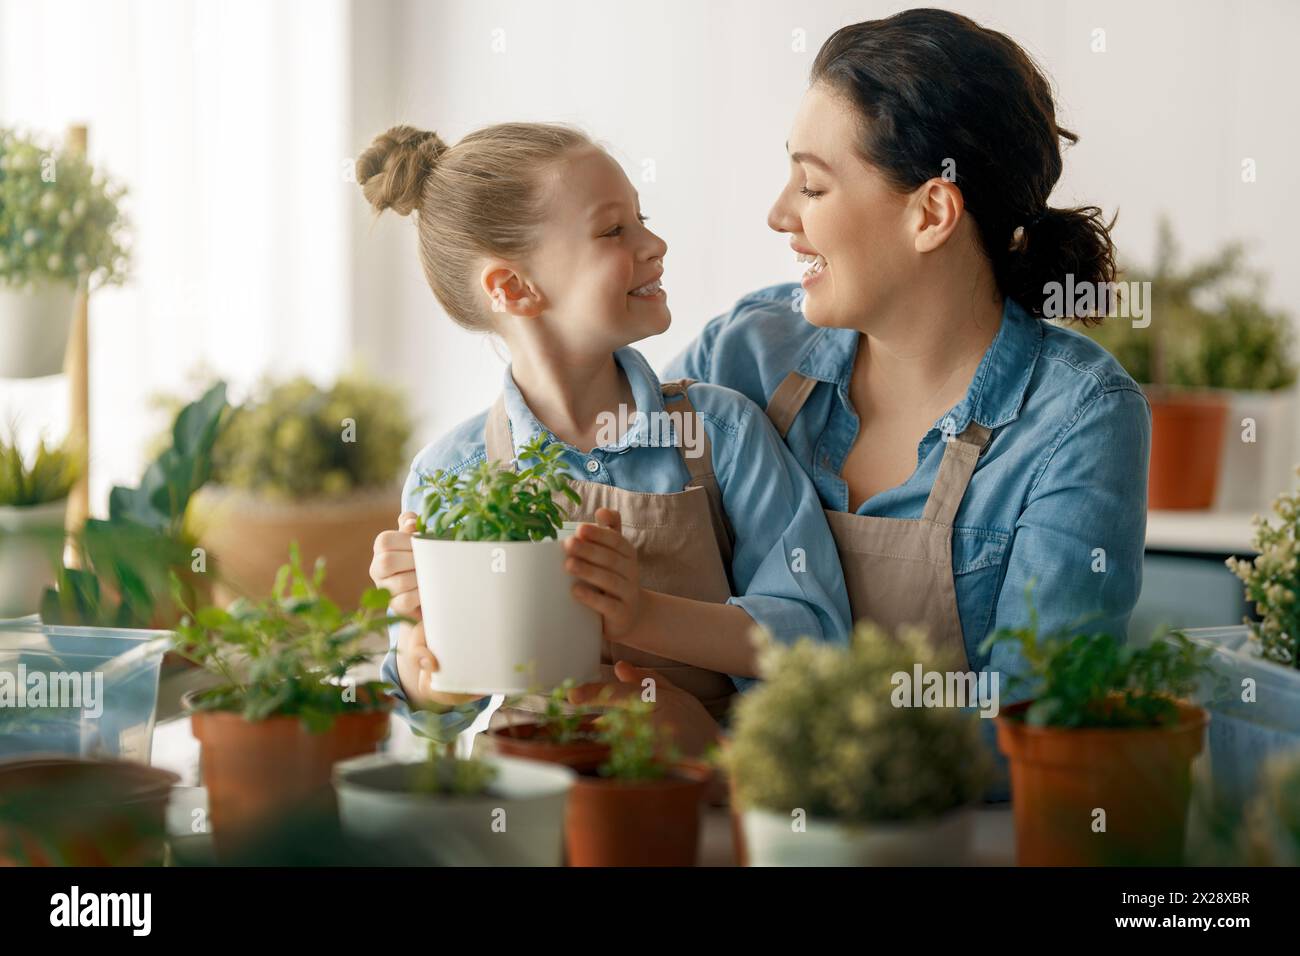 Cute child girl helping her mother to care for plants. Mom and her daughter engaging in gardening at home. Happy family in spring day. Stock Photo